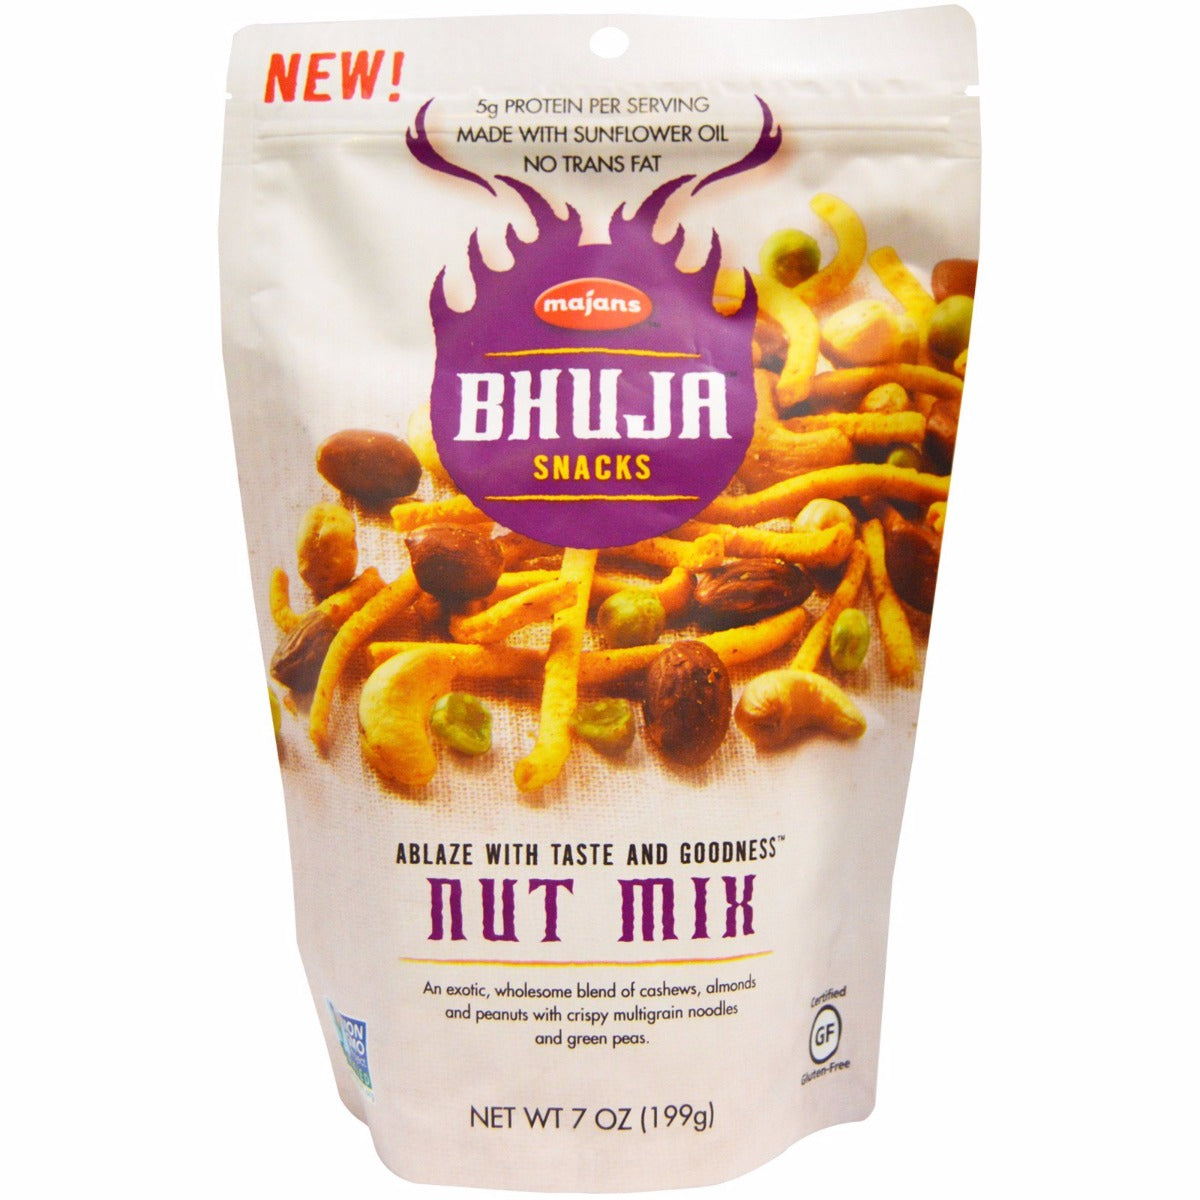 BHUJA: Snack Nut Mix, 7 oz - Vending Business Solutions